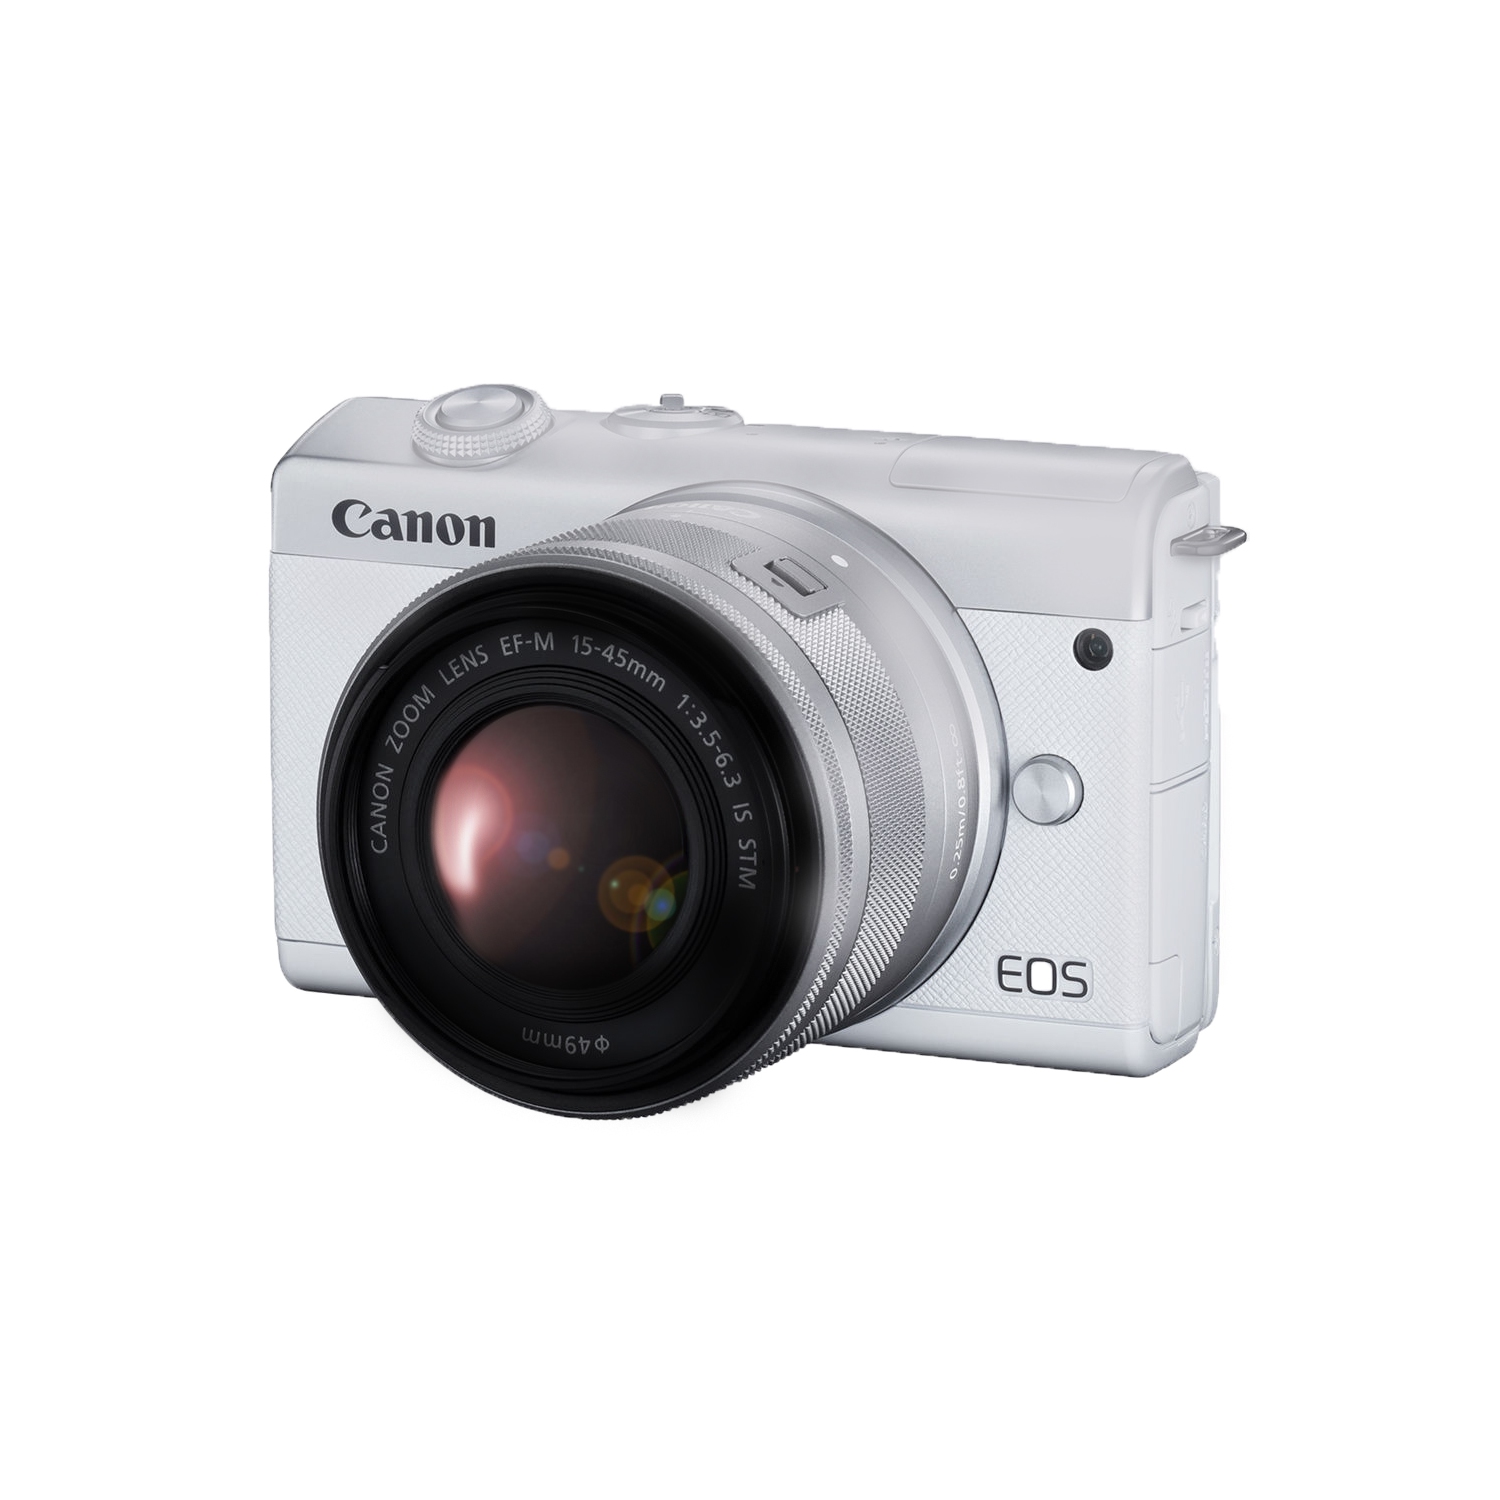 Canon EOS M200 Mirrorless Digital Camera with 15-45mm lens White Open Box International Version with Seller Warranty